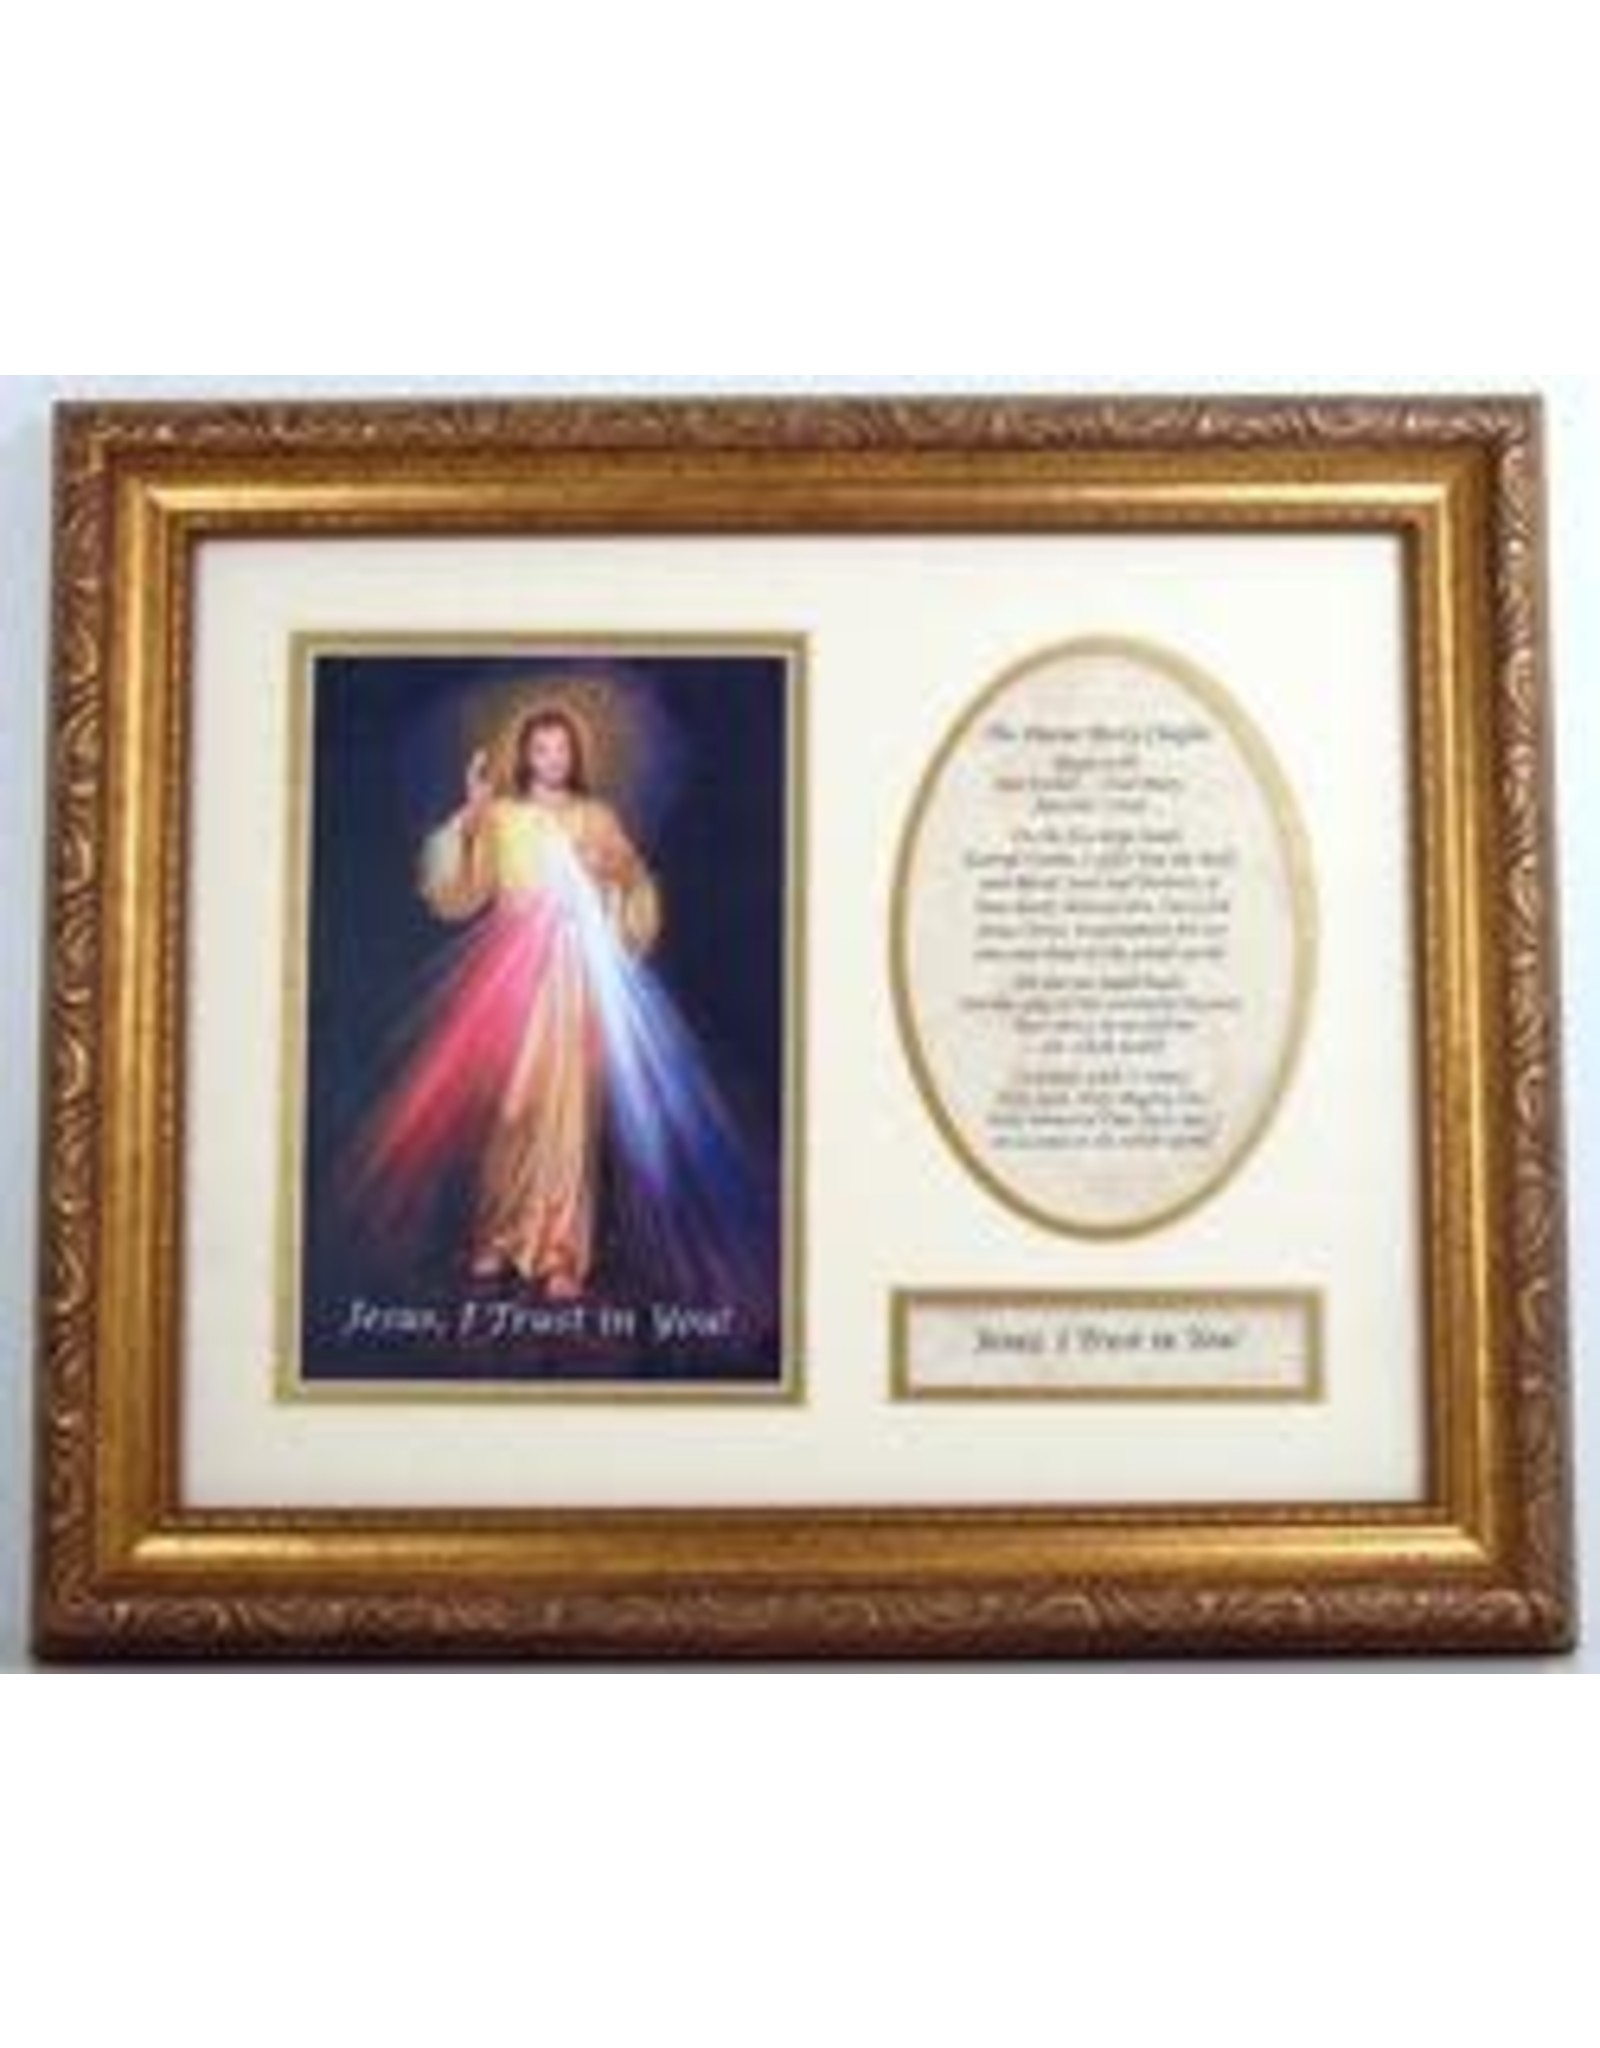 Divine Mercy Plaque with Chaplet 9x12 Matted & Framed